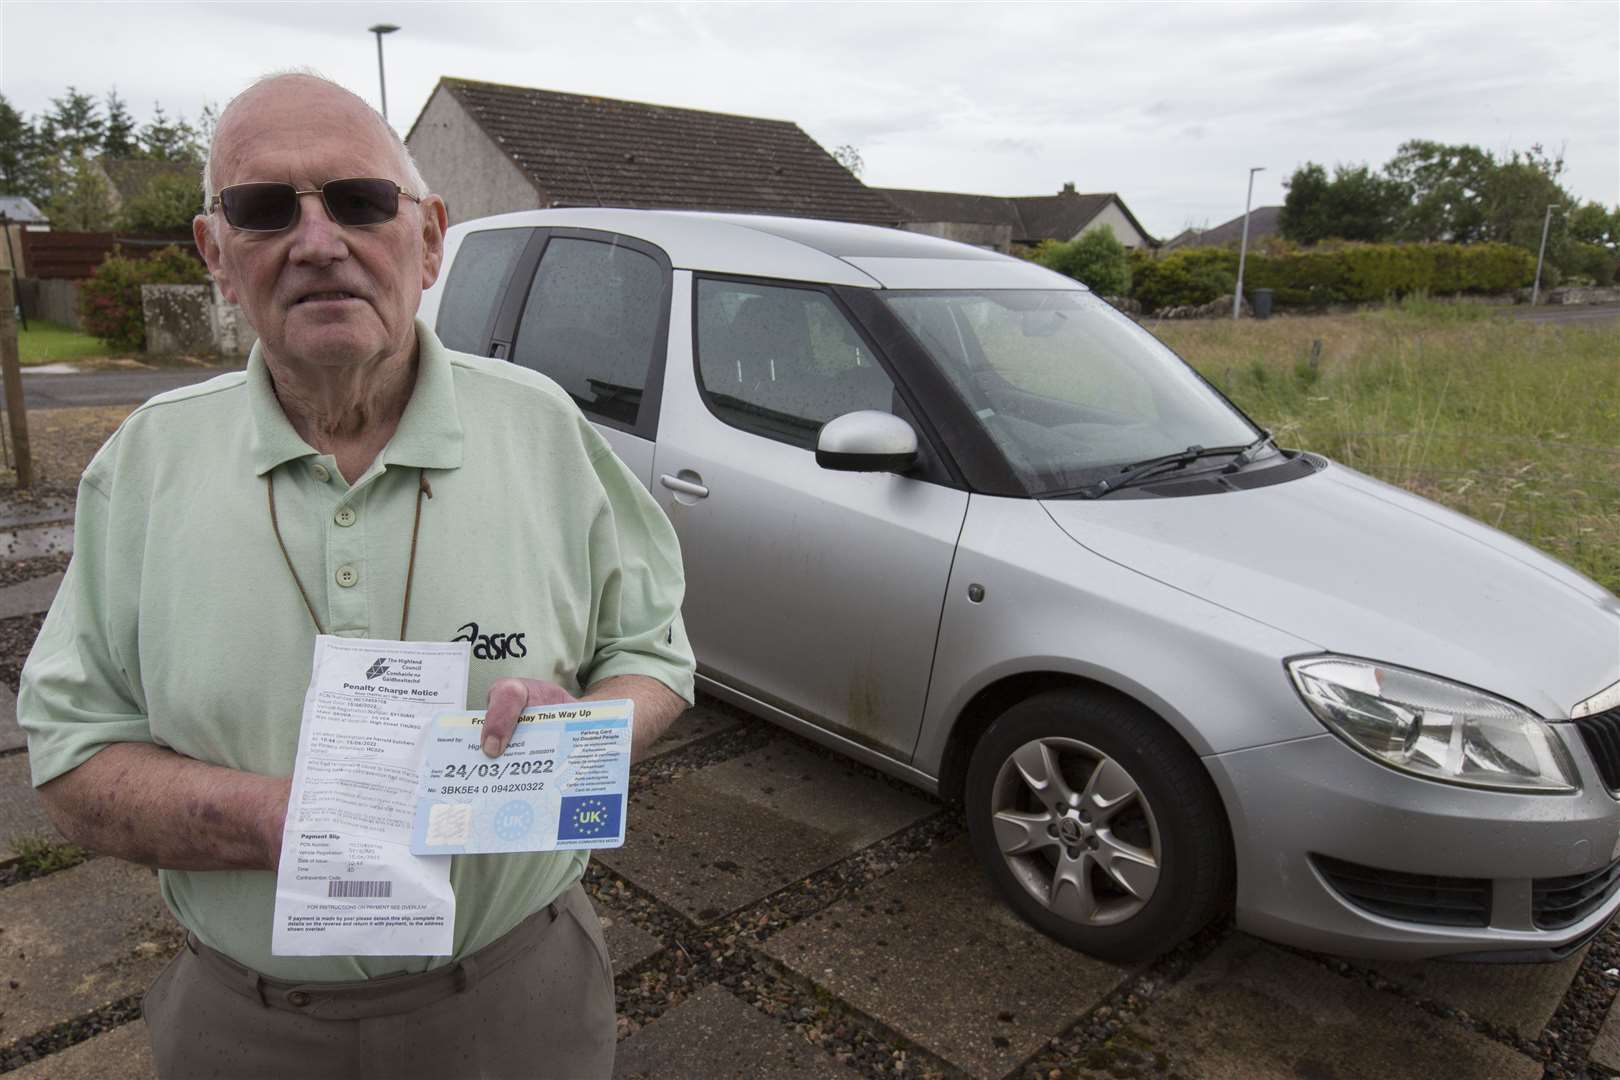 Halkirk man John O'Donnell, Marrbank, Camilla St, Halkirk, with the parking ticket he received for having an expired disability parking card, shortly after his wife died. Photo: Robert MacDonald/Northern Studios